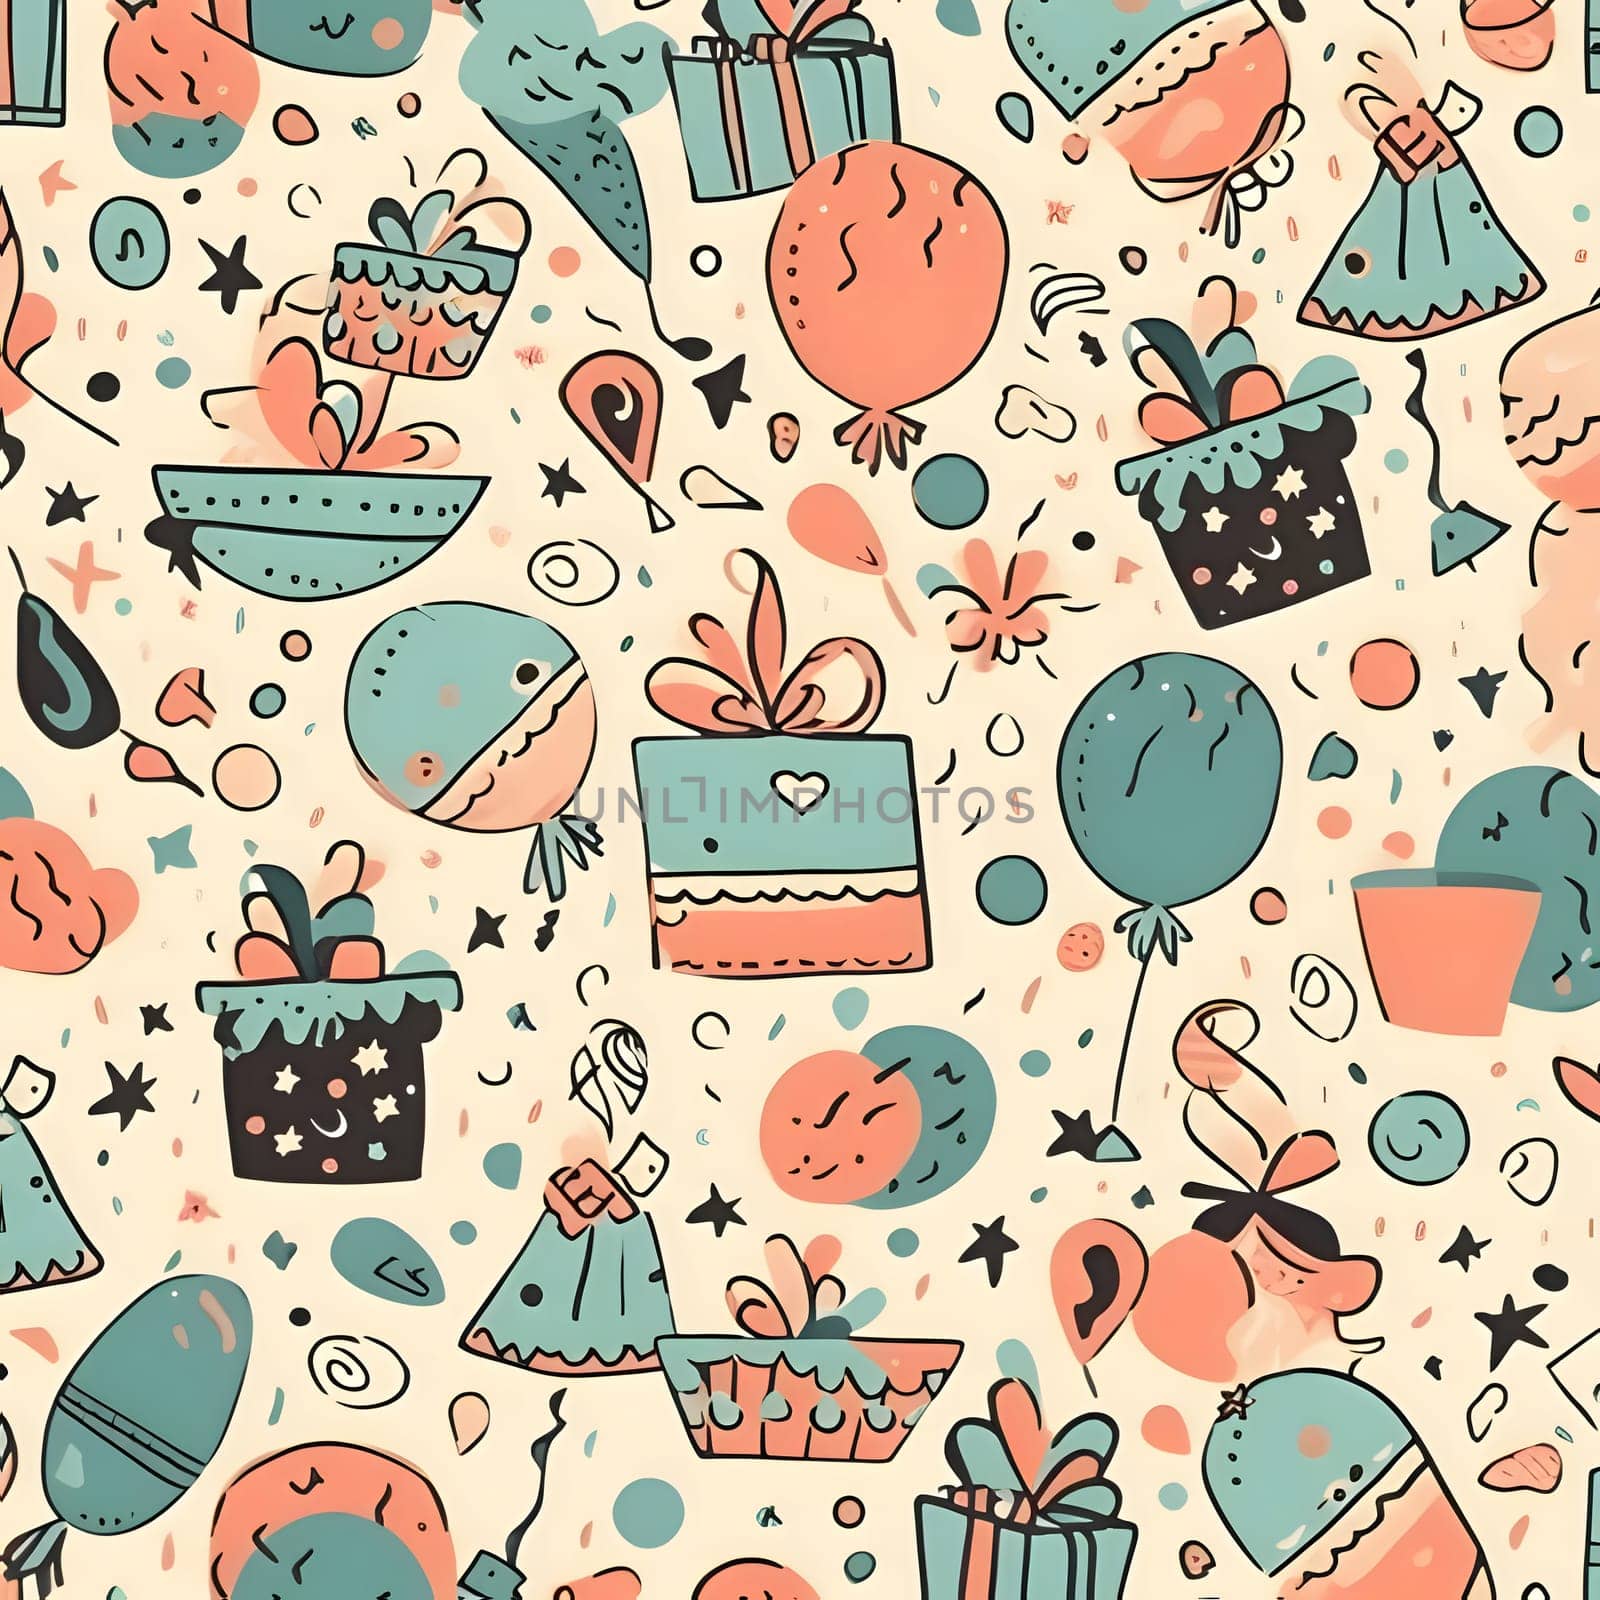 Patterns and banners backgrounds: Seamless pattern with cute hand drawn elements. Vector illustration.